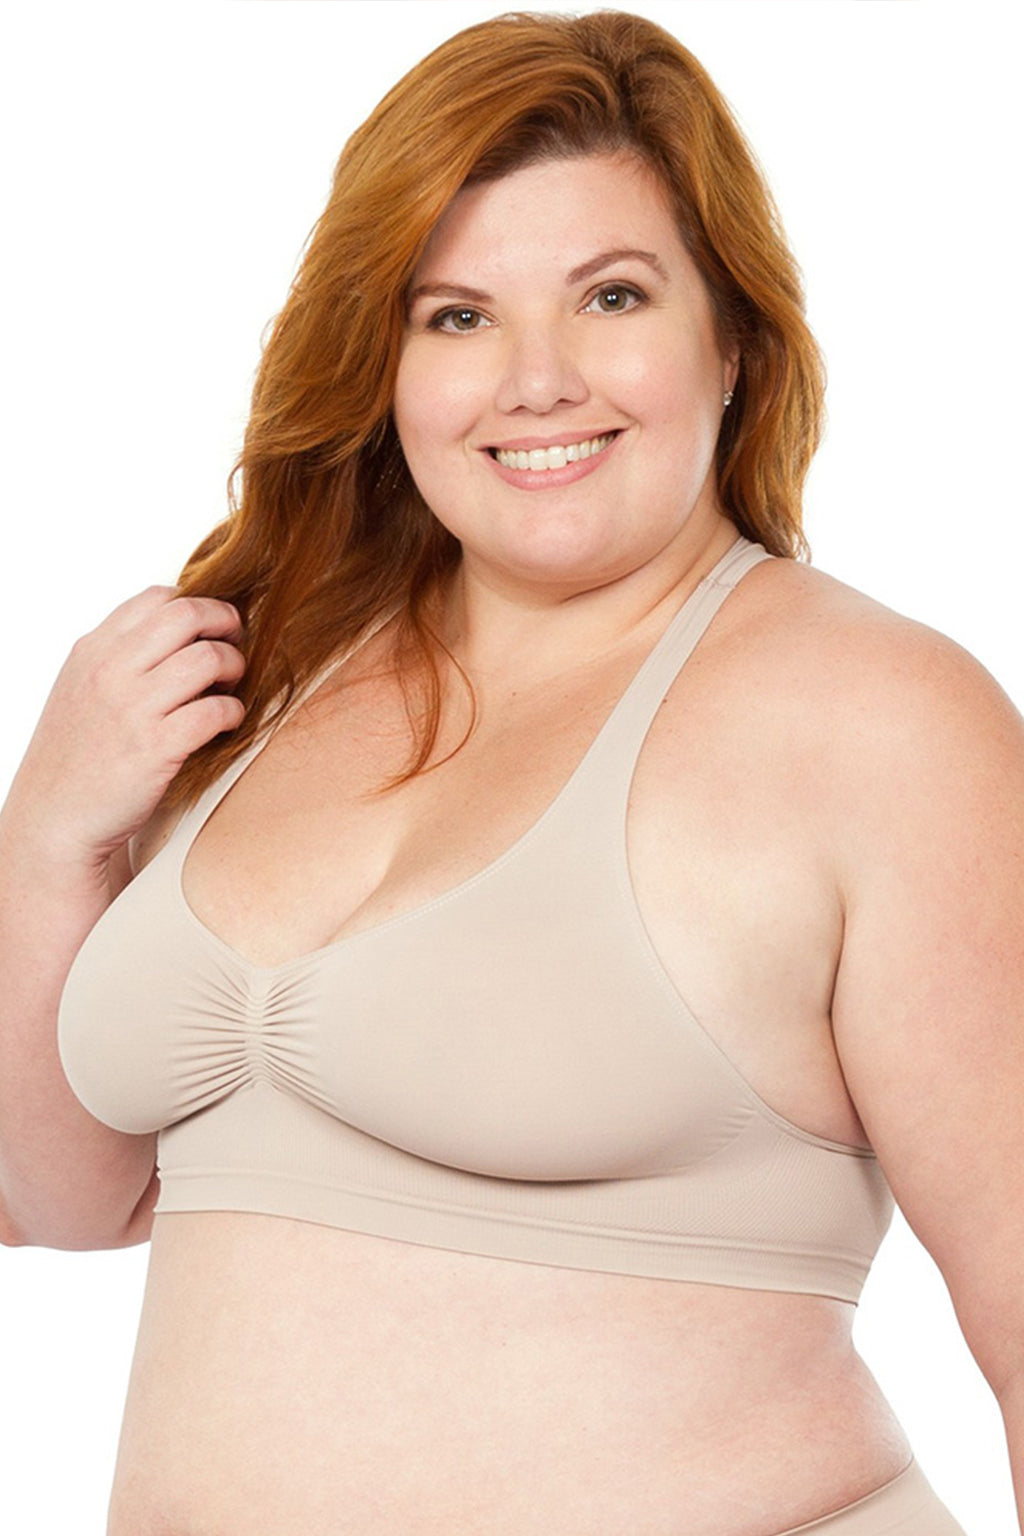 Plus Size Top Control Support Bra